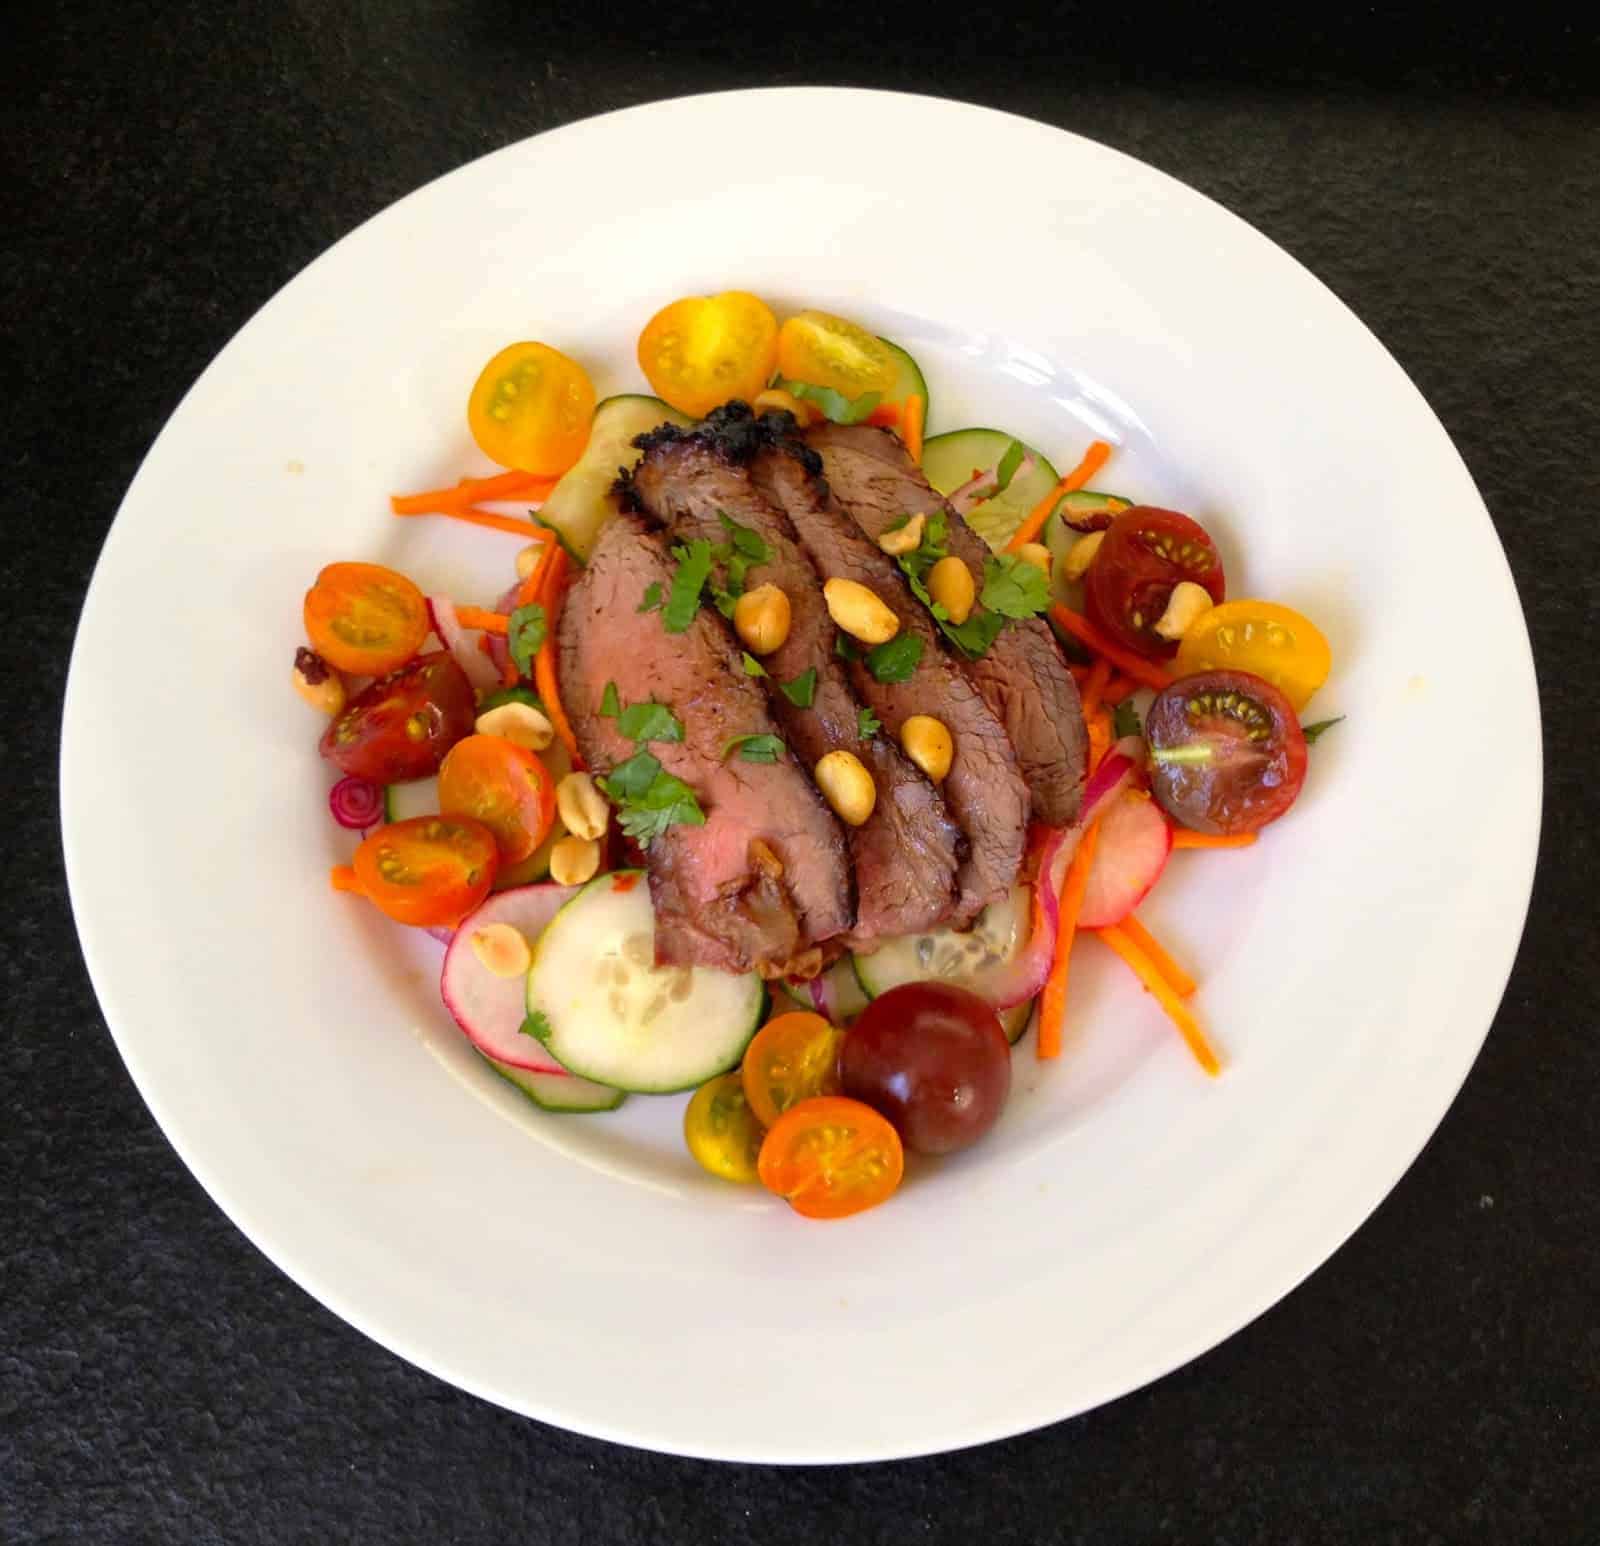 Grilled Sirloin Steak Salad with Seasonal Vegetables and Asian flavors